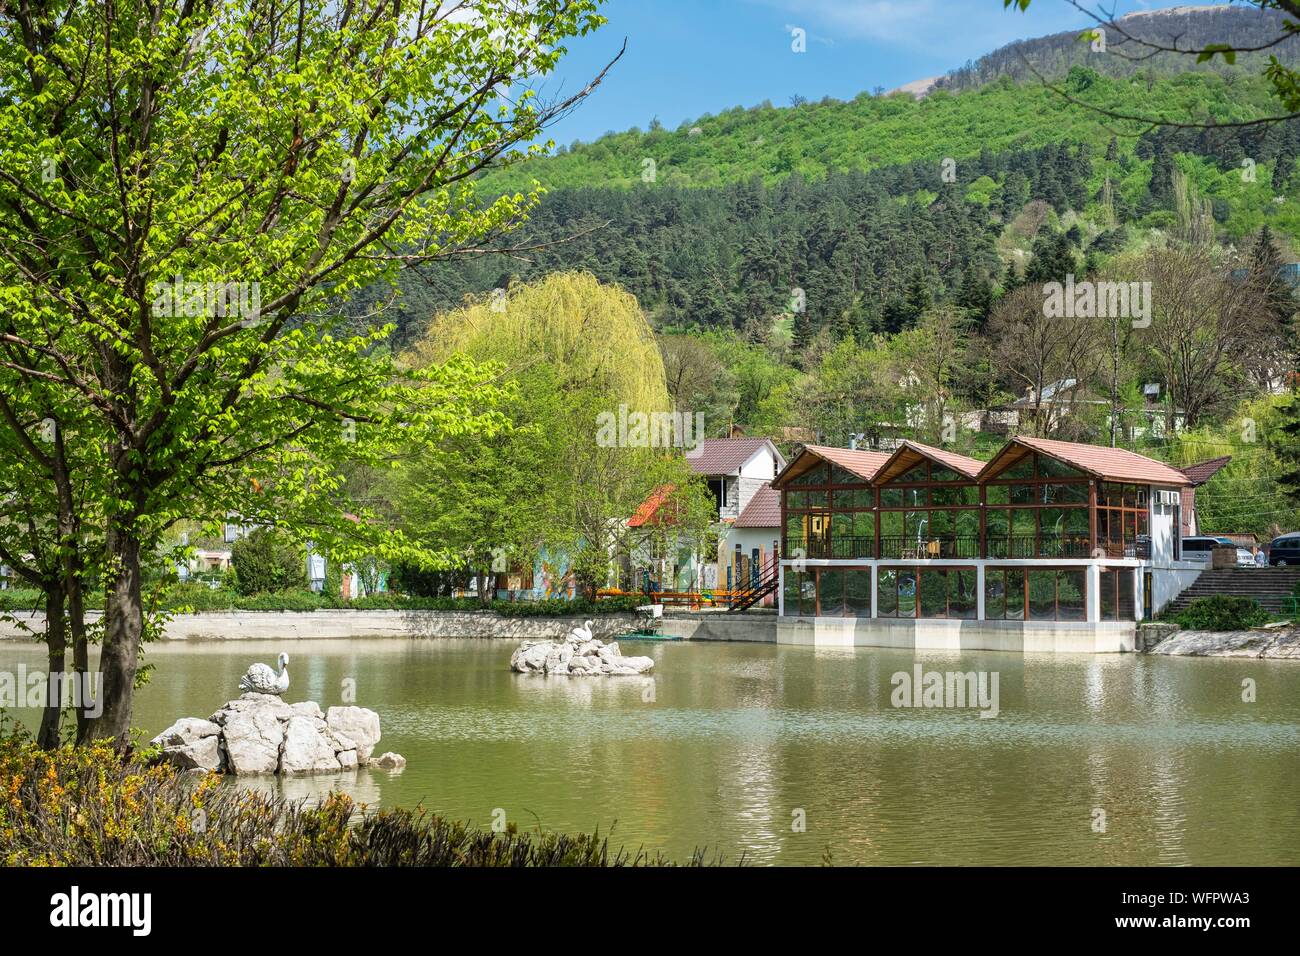 Armenia, Tavush region, Dilijan, thermal and spa resort nestled in a mountainous and wooded area Stock Photo